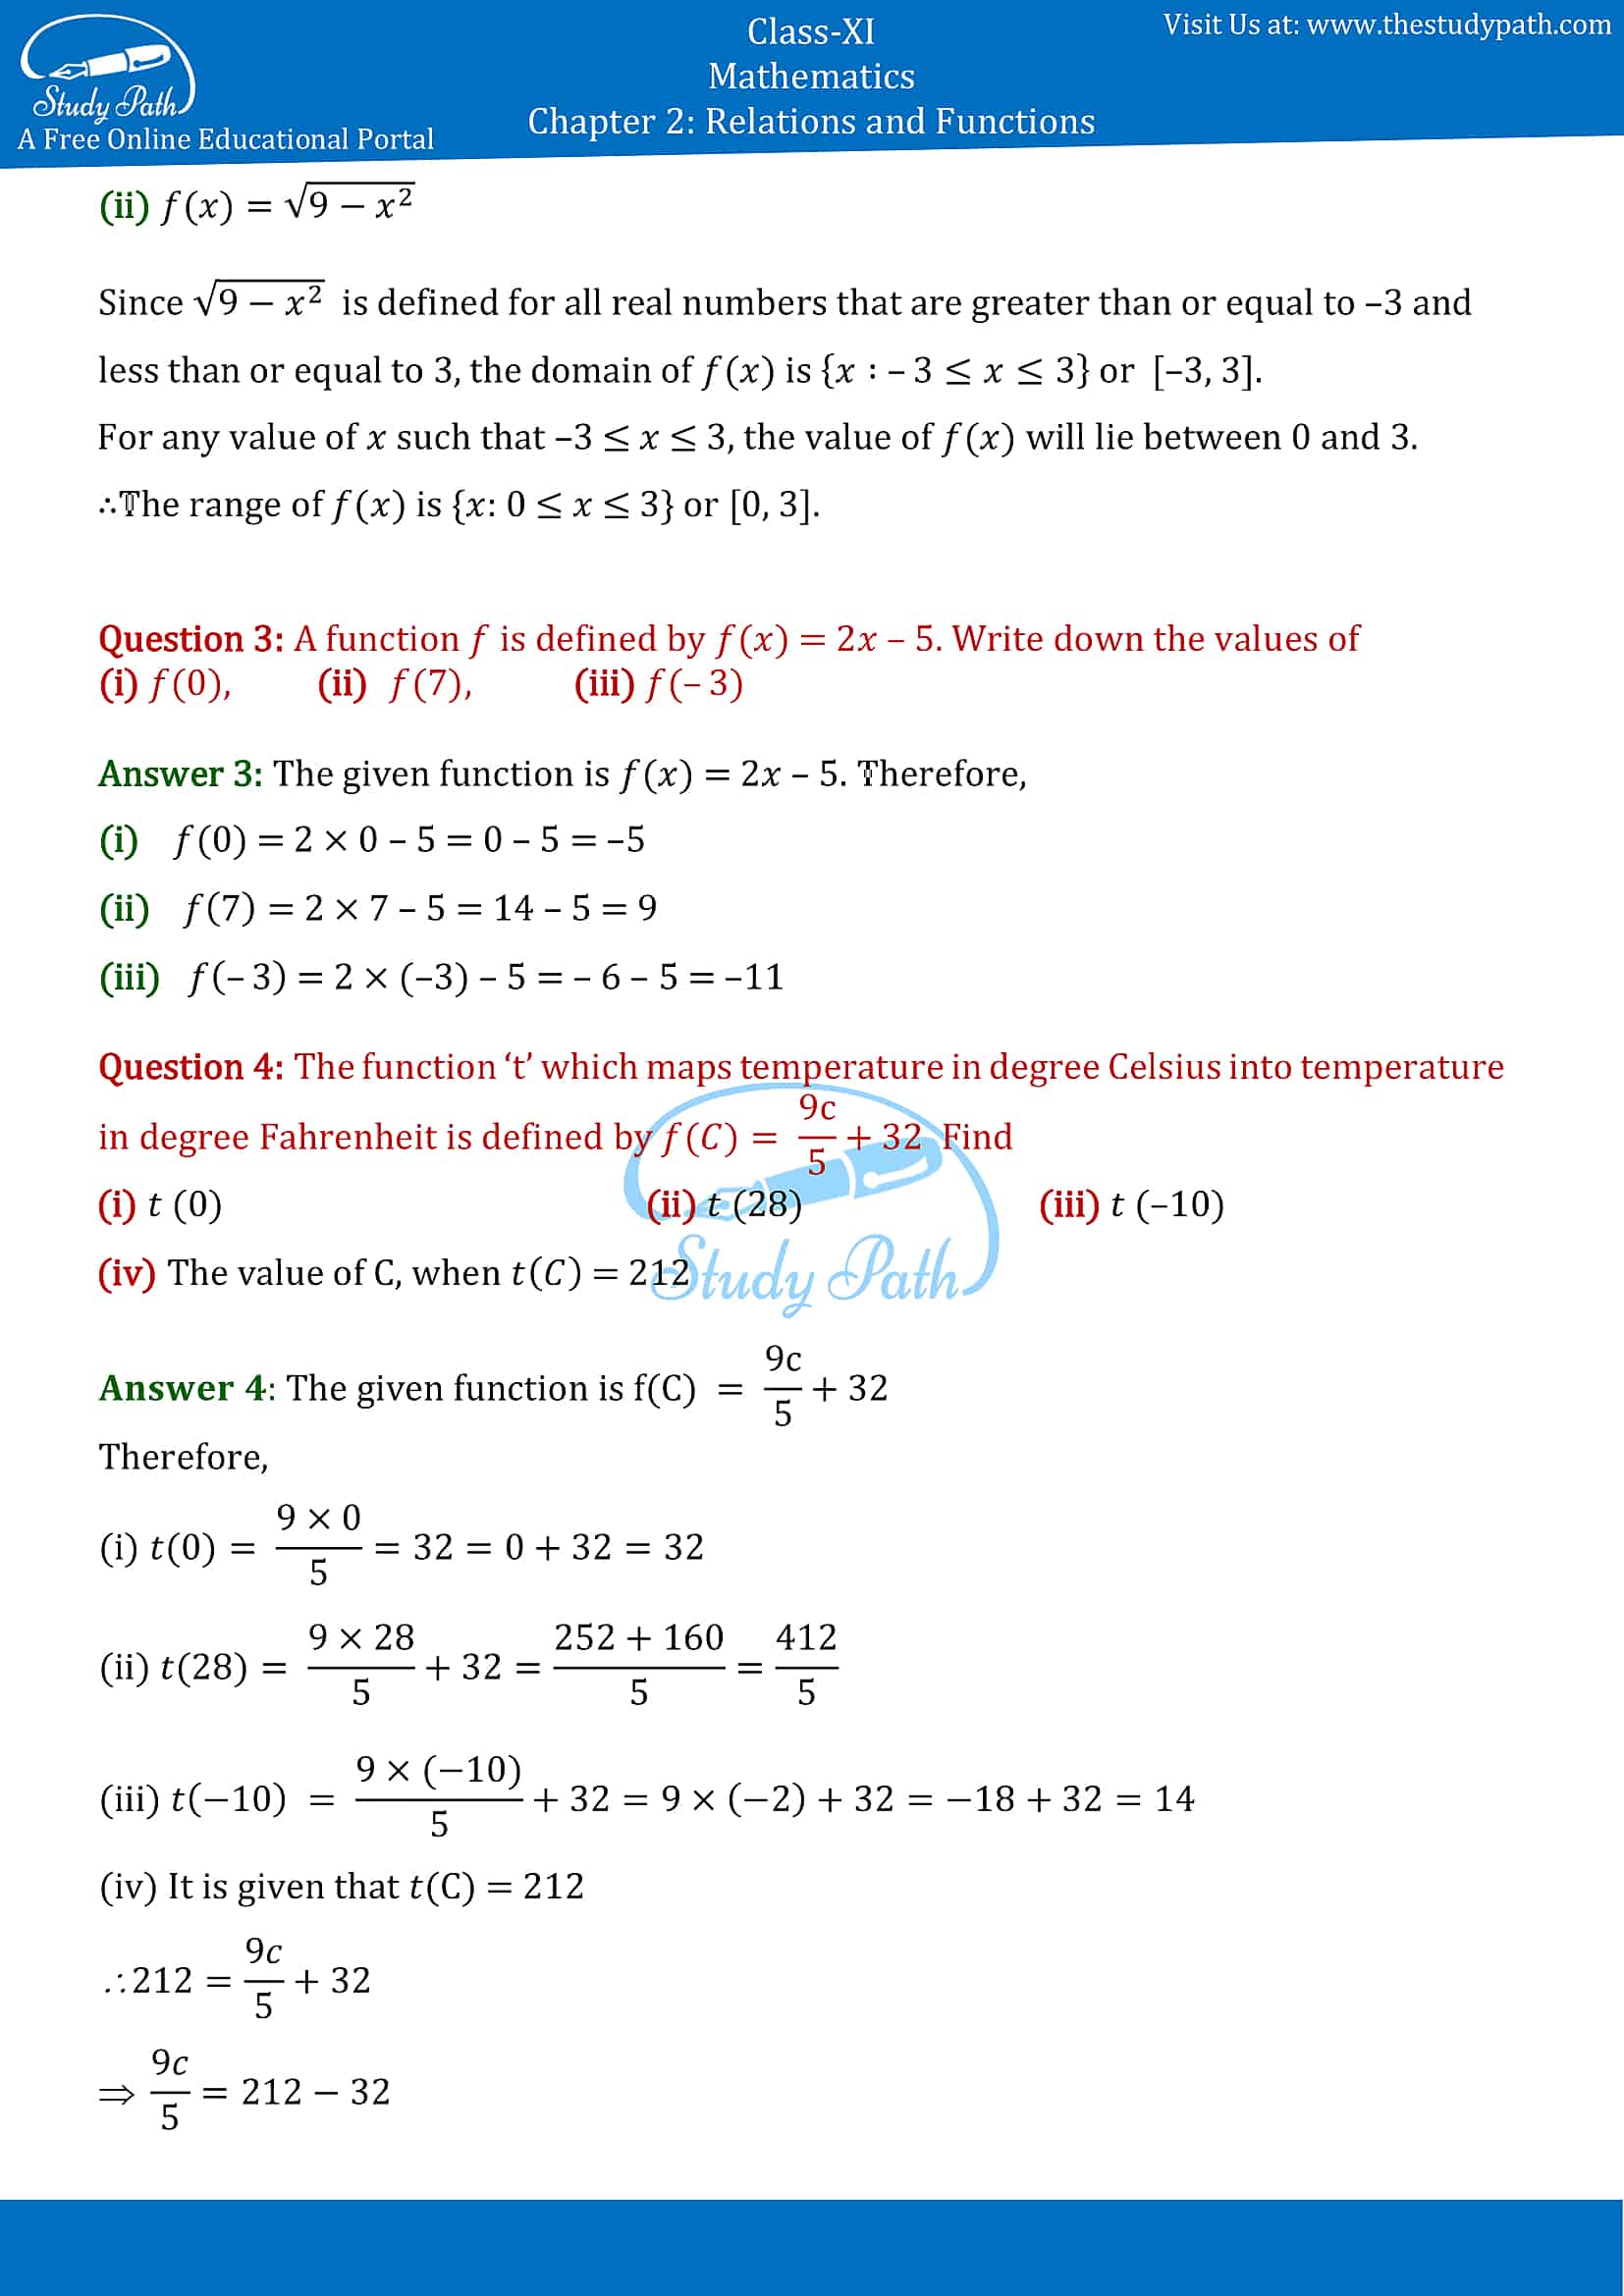 NCERT Solutions for Class 11 Maths Chapter 2 Relations and Functions Exercise 2.3